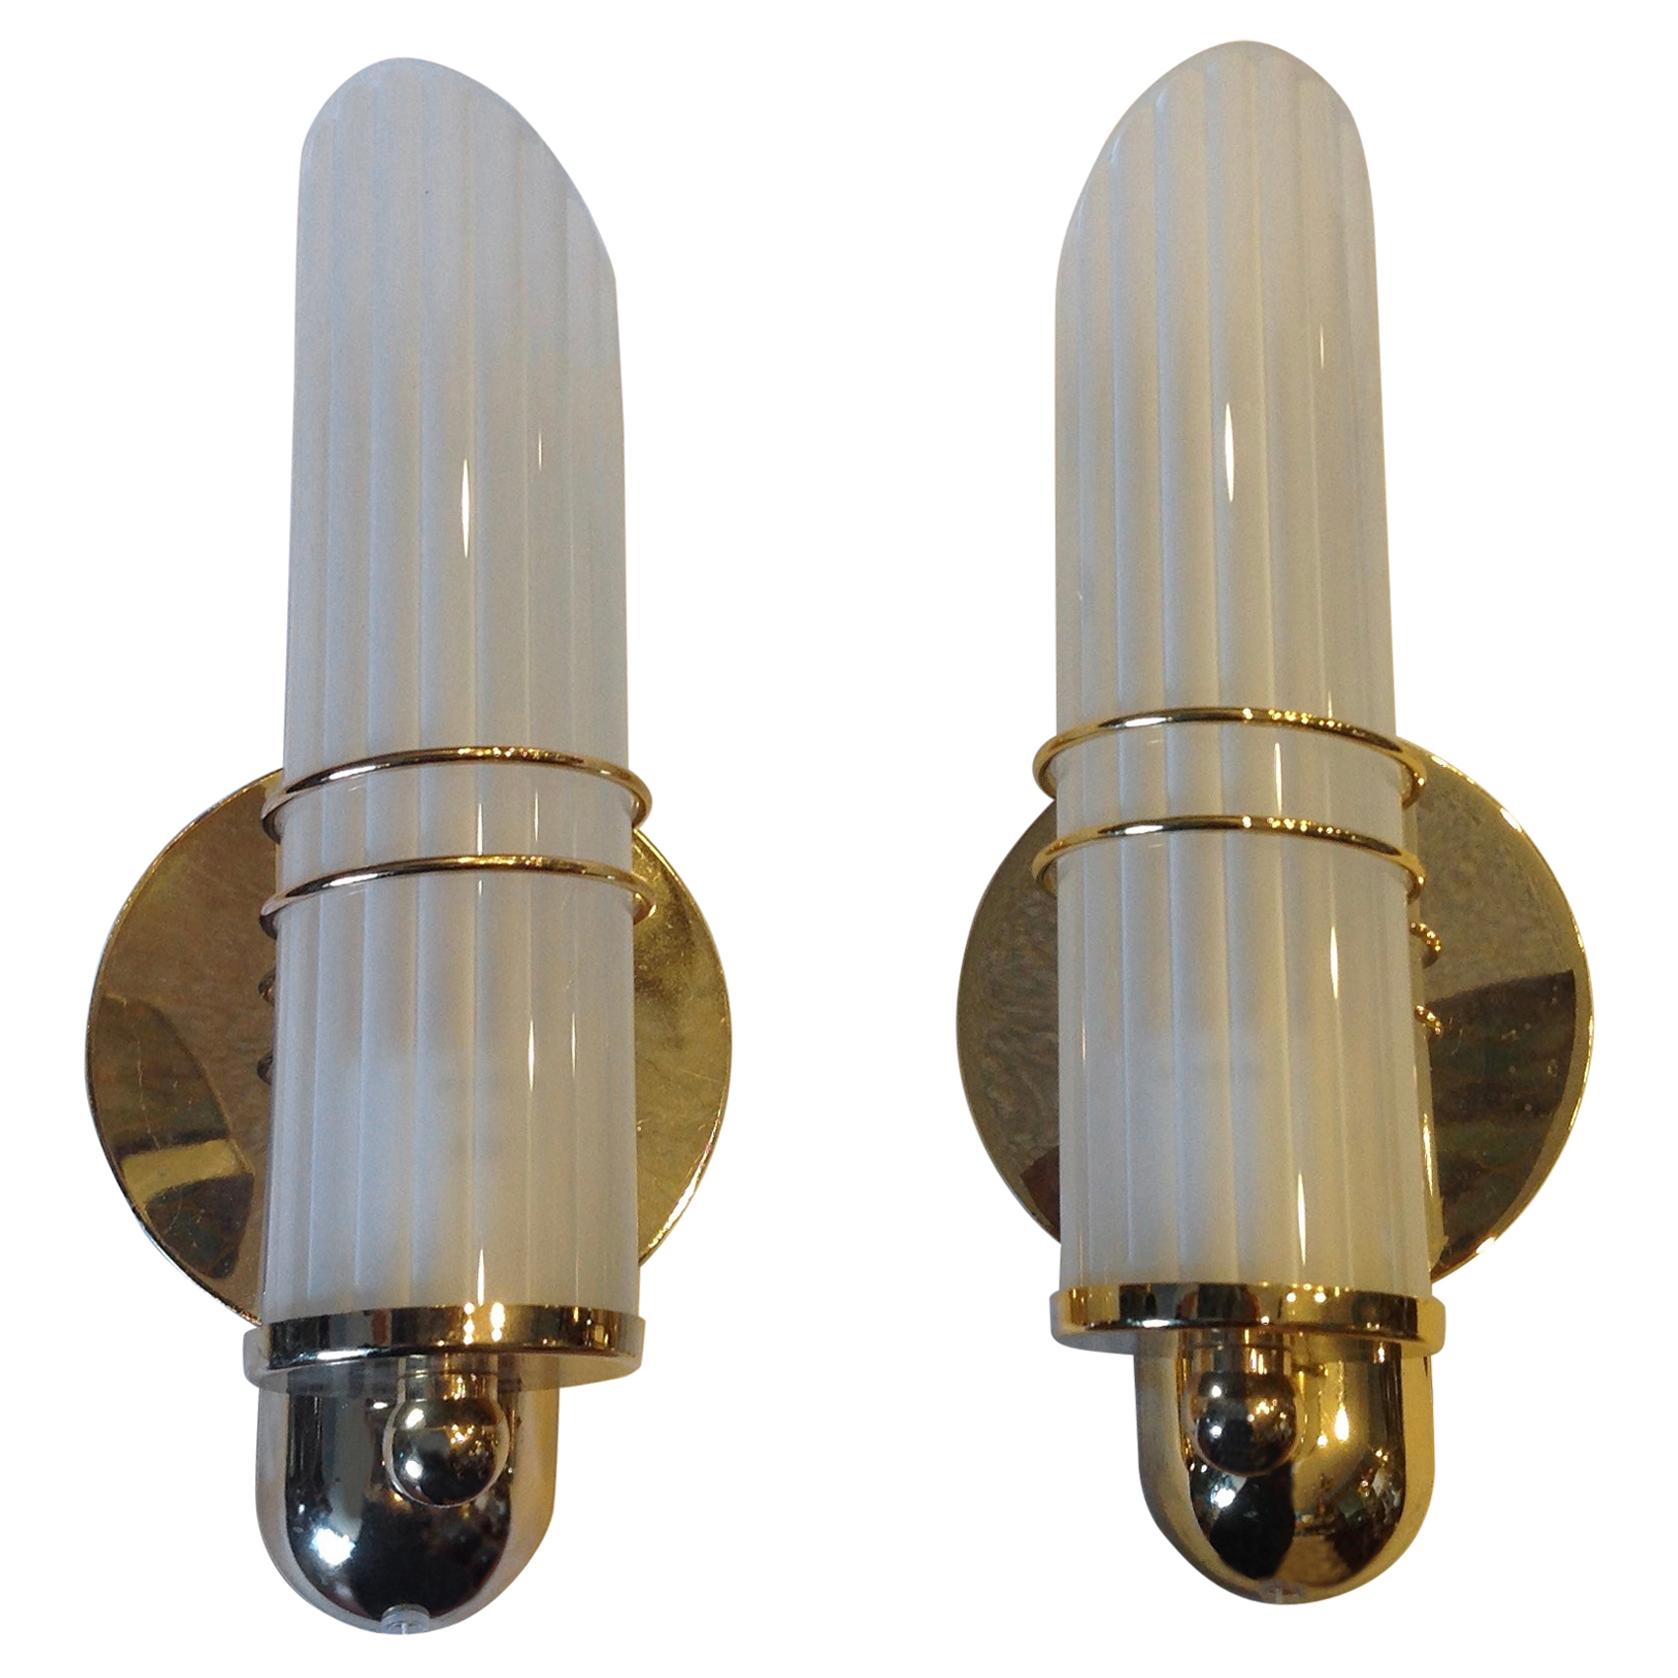 Pair of Art Moderne Gold-Plated Sconces